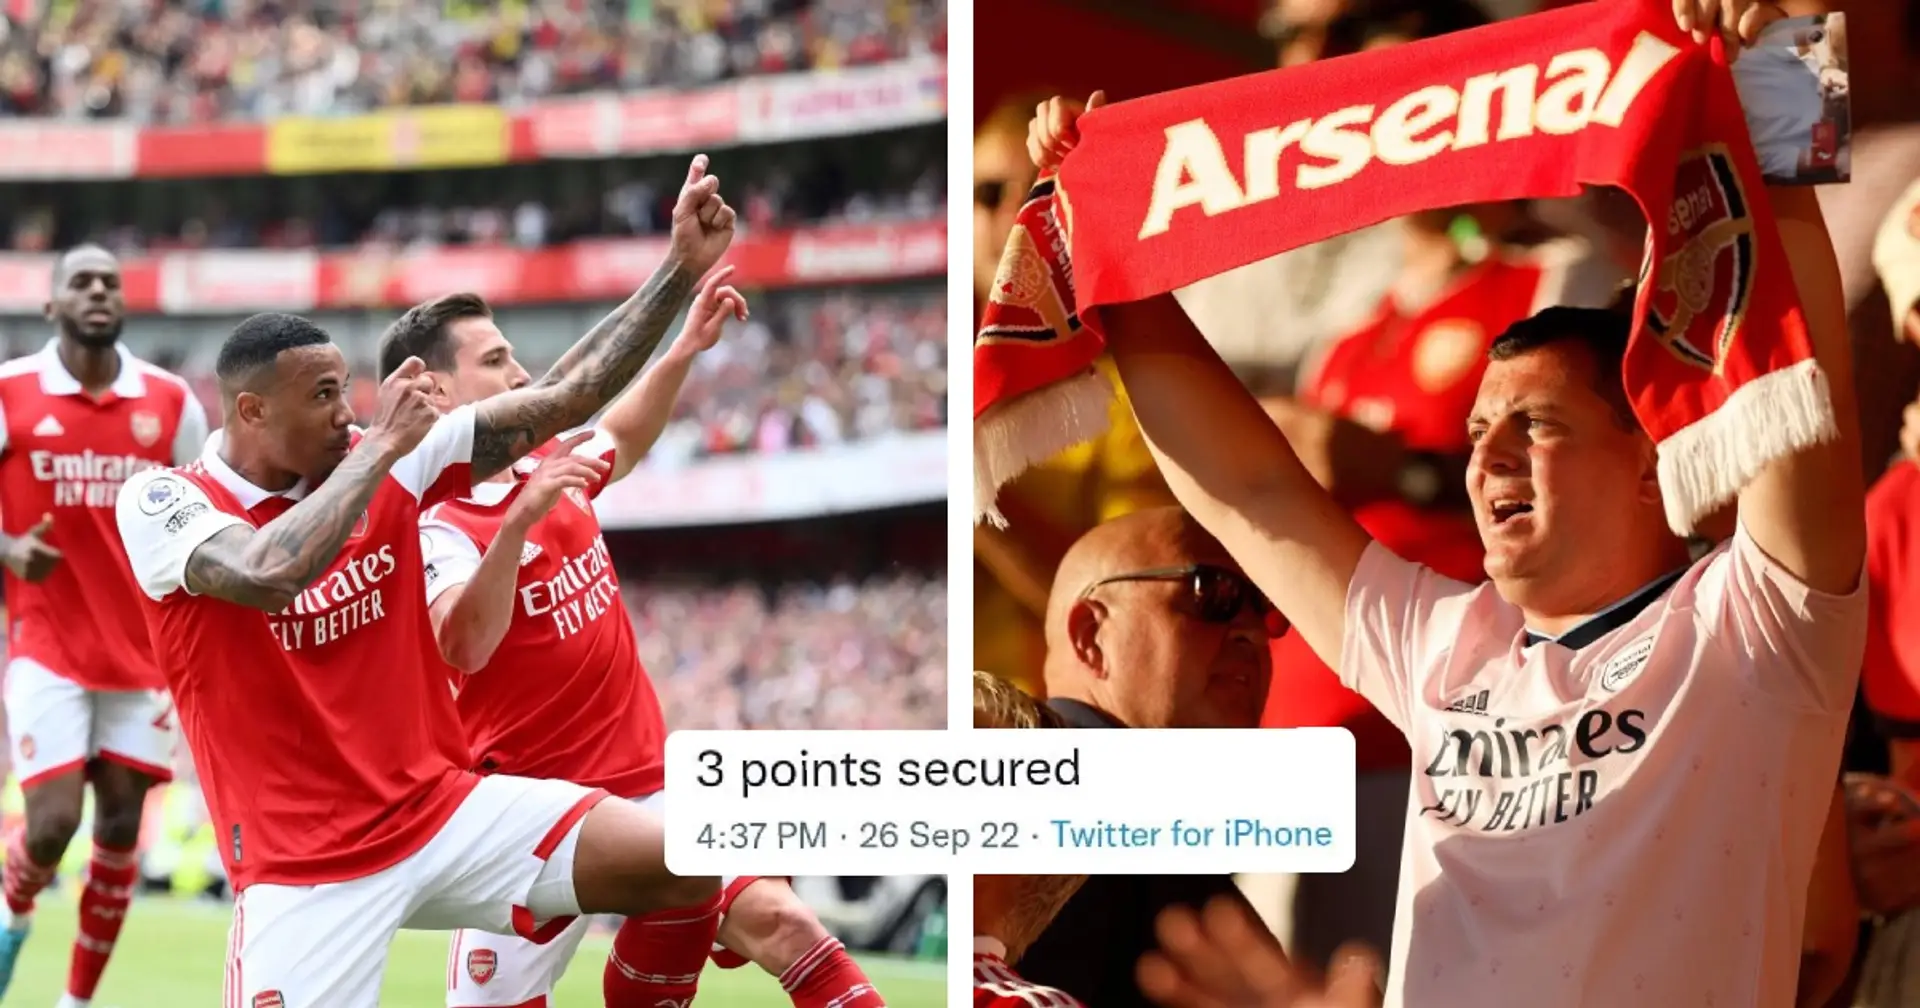 '4-0 victory': Arsenal fans go wild over major announcement ahead of Spurs game